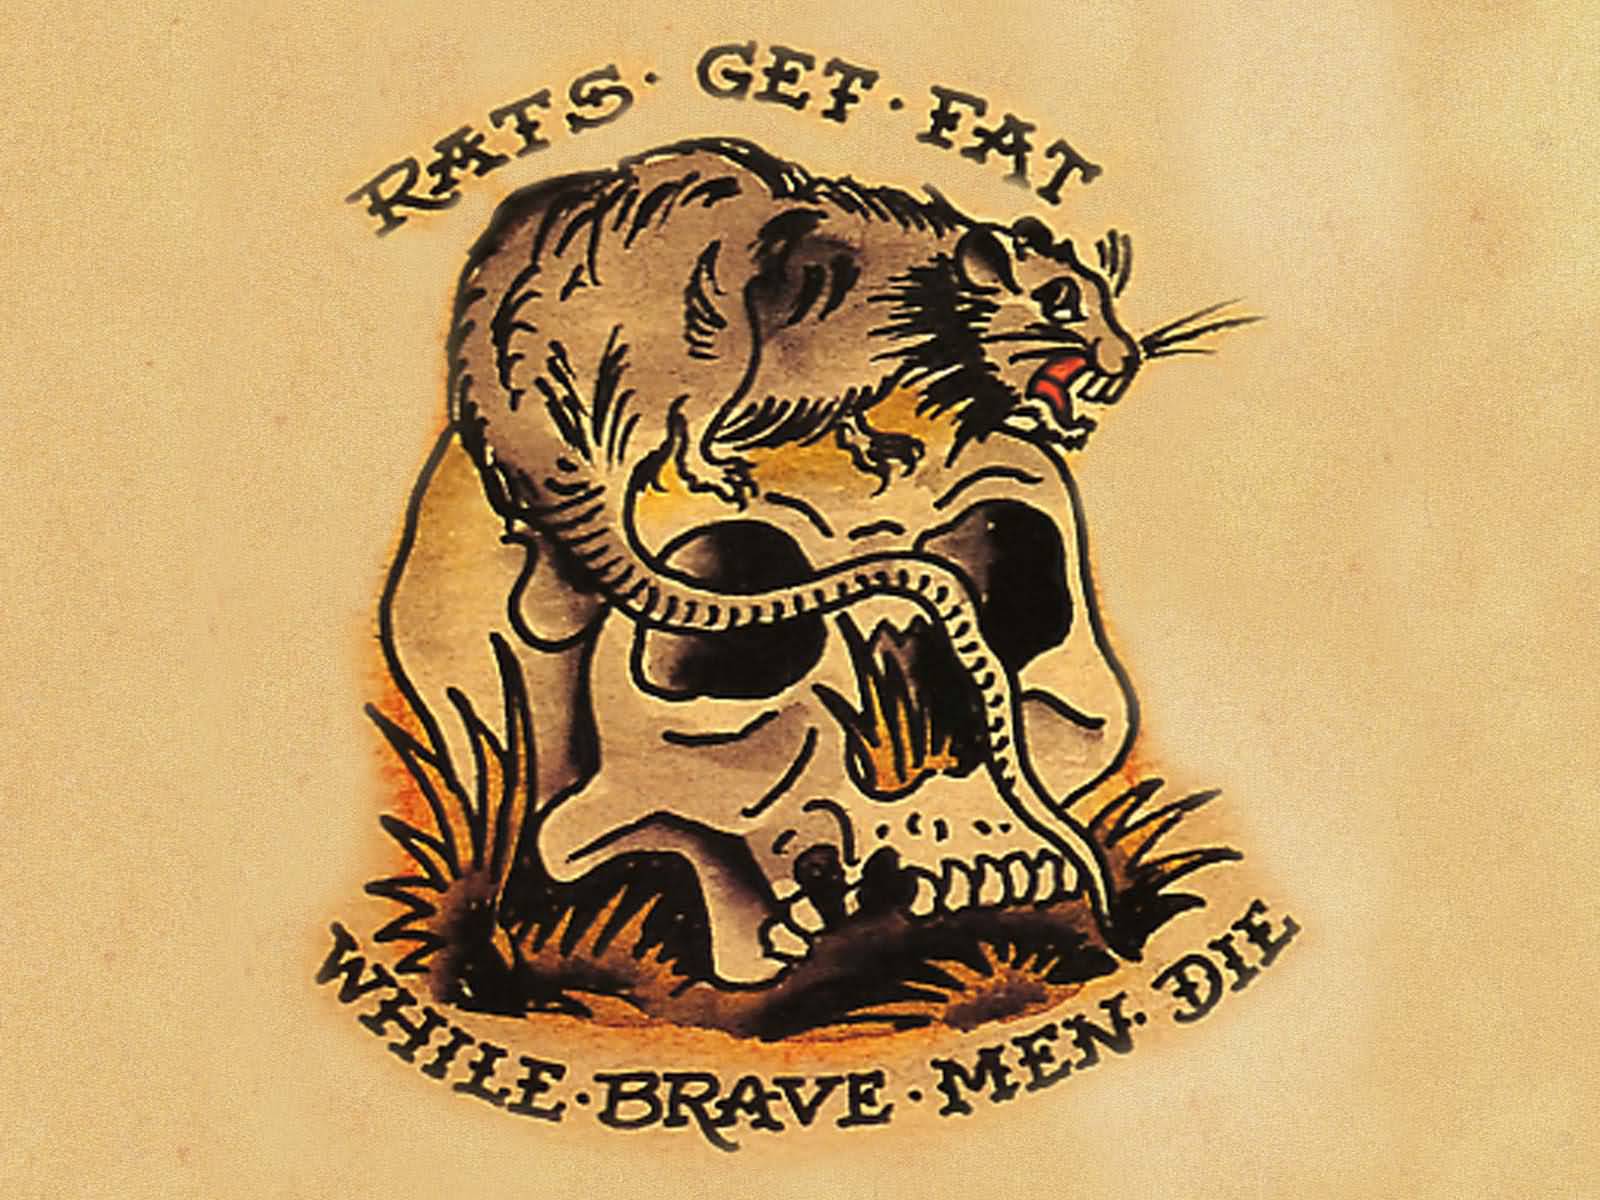 Nice Truth Saying With Rat On Skull Old School Tattoo Design